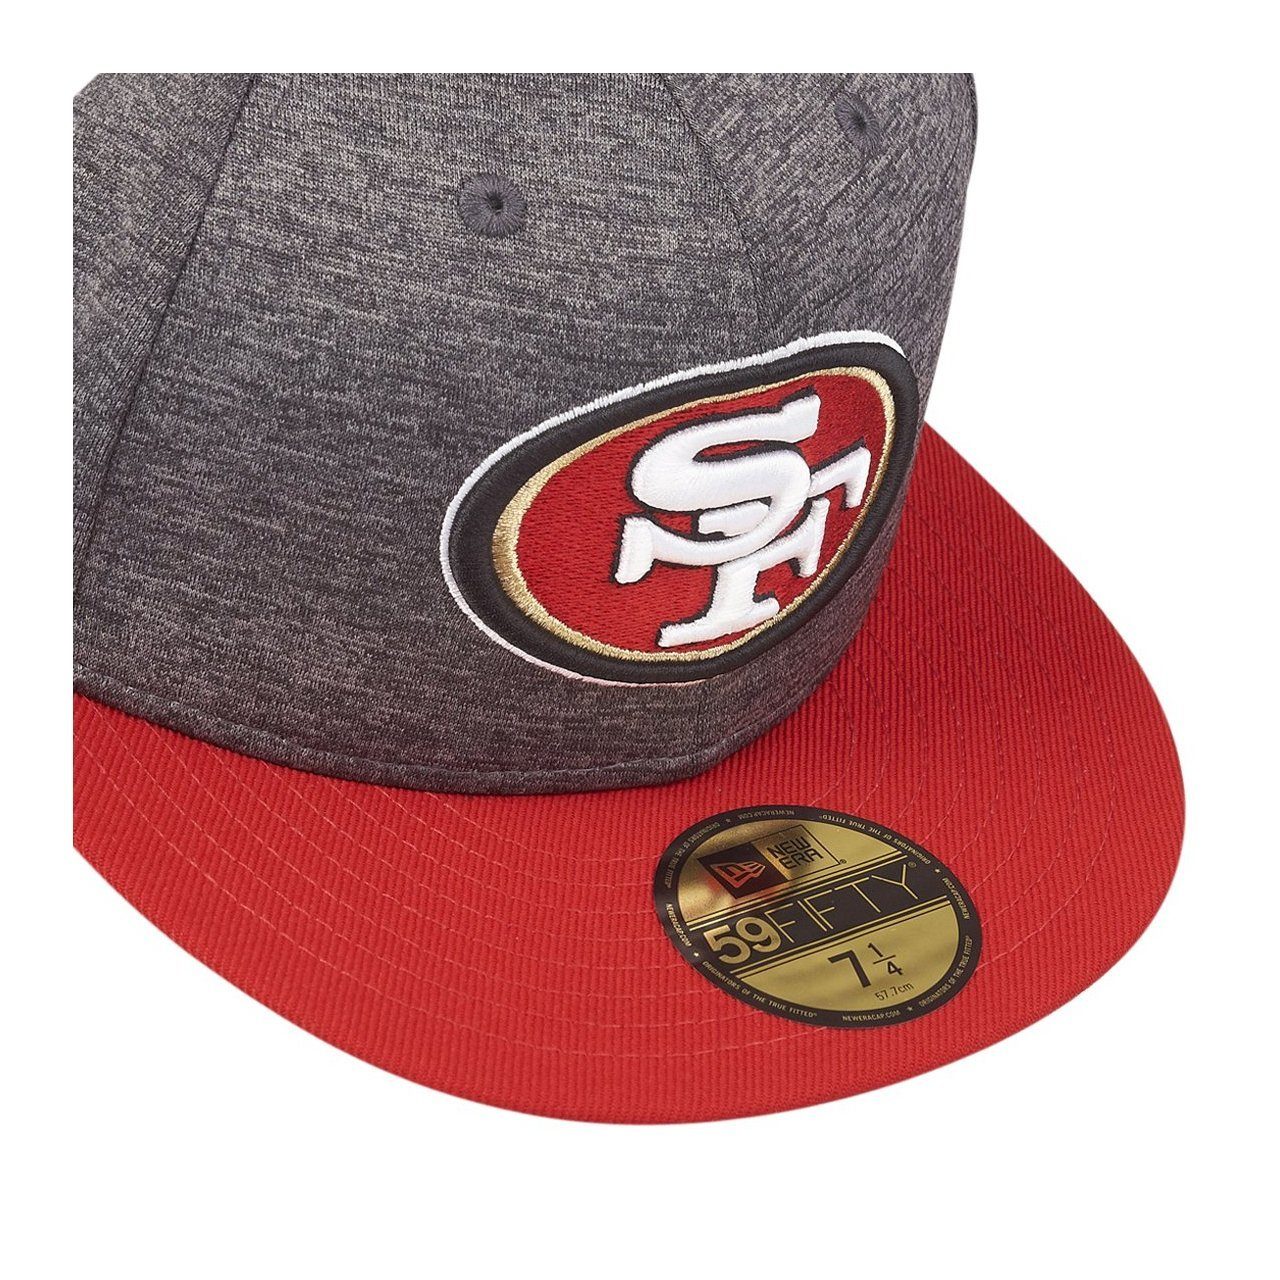 TECH San SHADOW 49ers Era Francisco 59Fifty New Fitted Cap